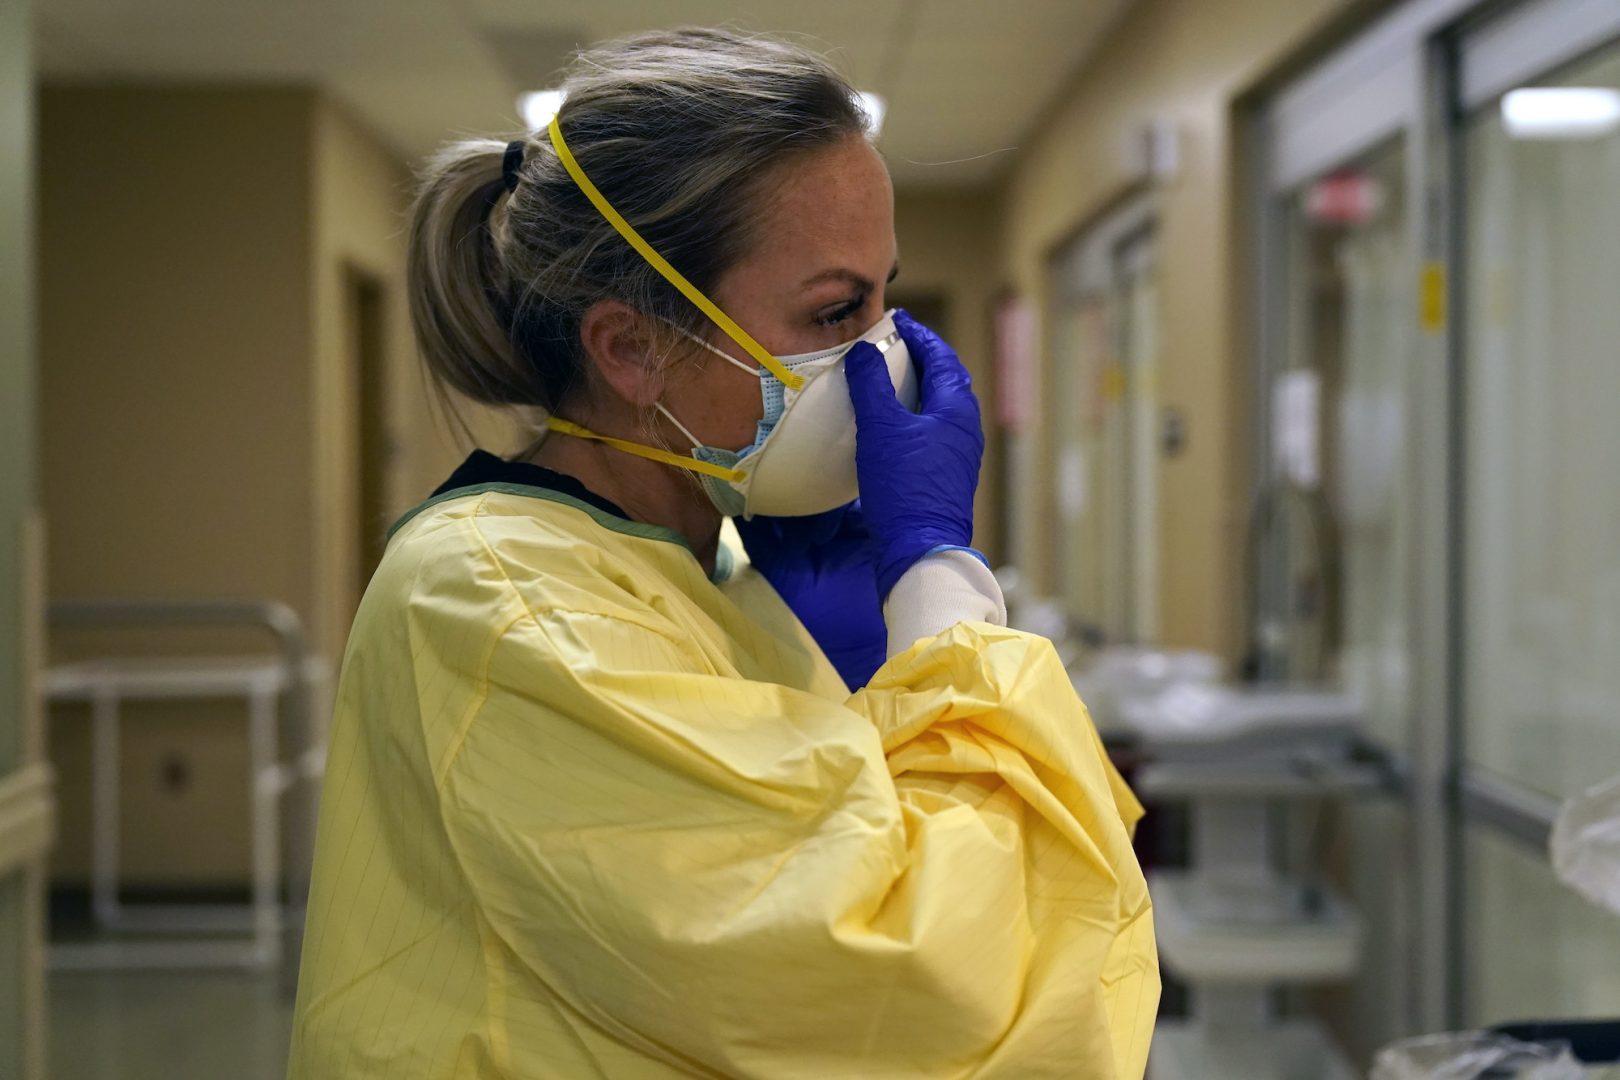 Registered nurse Chrissie Burkhiser puts on personal protective equipment as she prepares to treat a COVID-19 patient in the in the emergency room at Scotland County Hospital Tuesday, Nov. 24, 2020, in Memphis, Mo. The tiny hospital in rural northeast Missouri is seeing an alarming increase in coronavirus cases.